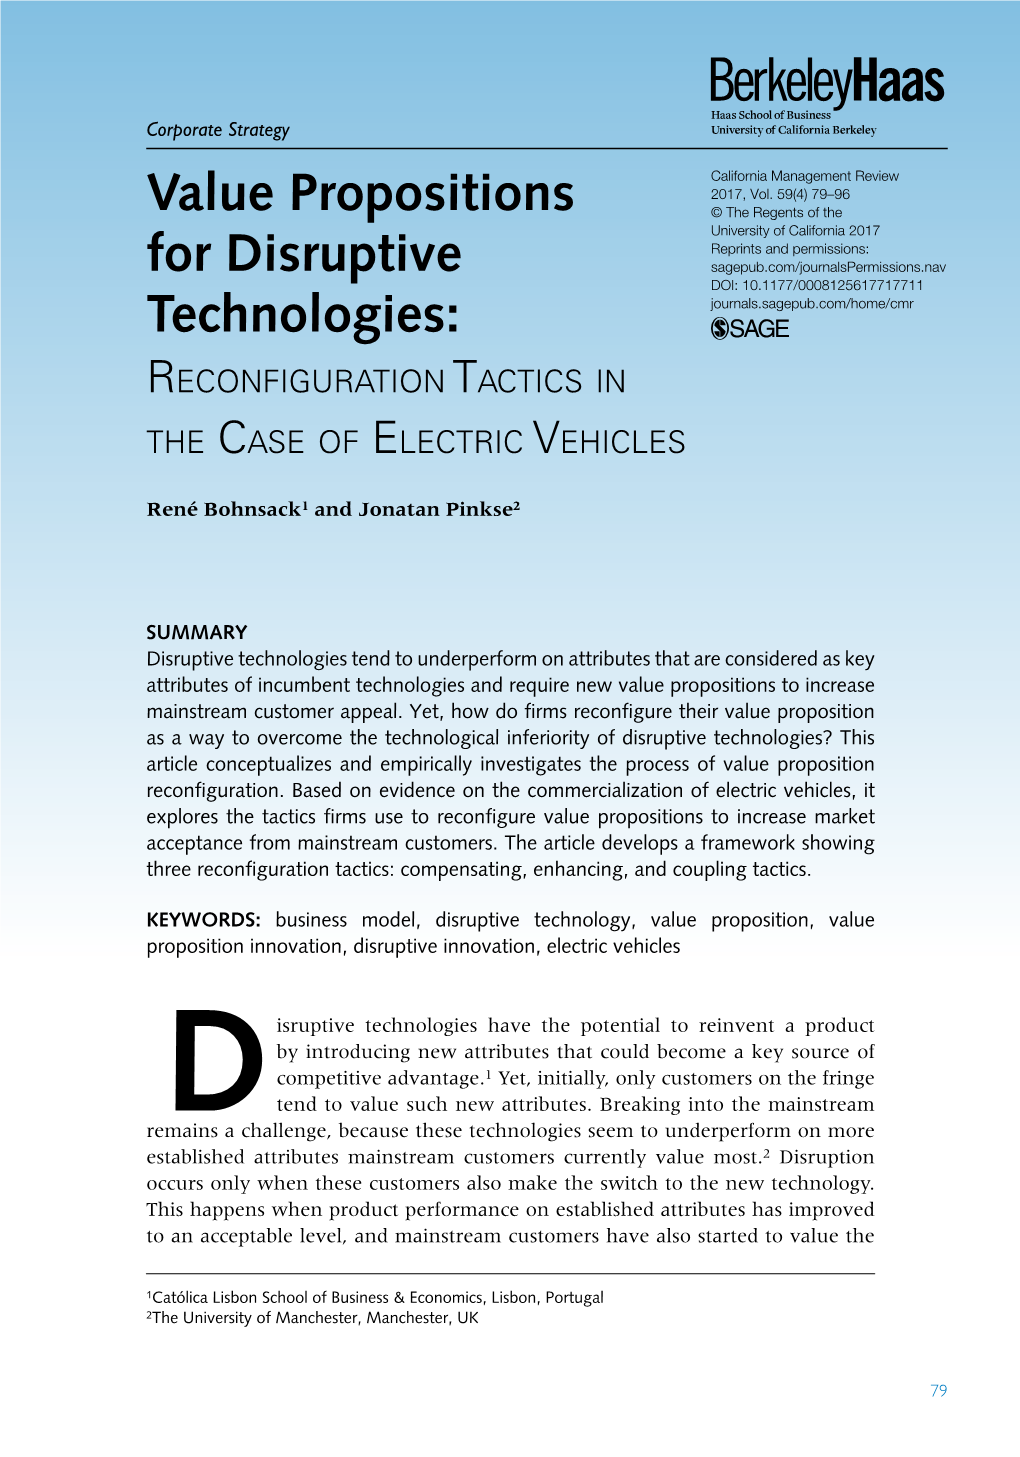 Value Propositions for Disruptive Technologies: Reconfguration Tactics in the Case of Electric Vehicles 81